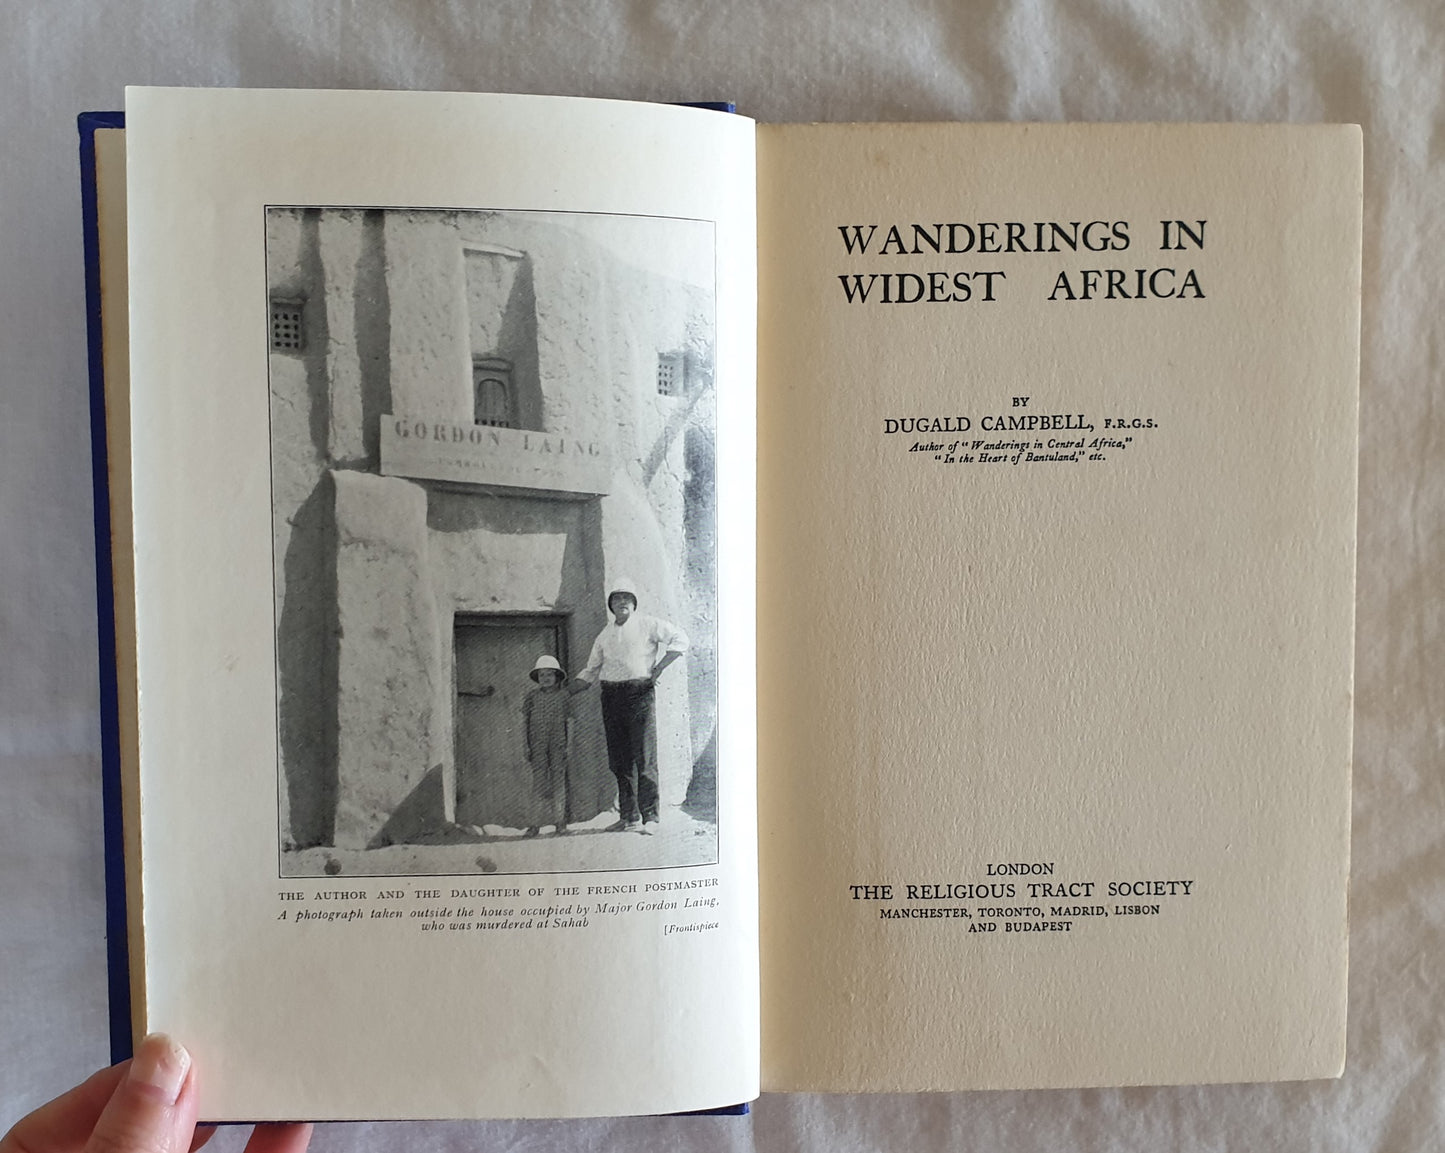 Wanderings in Widest Africa by Dugald Campbell